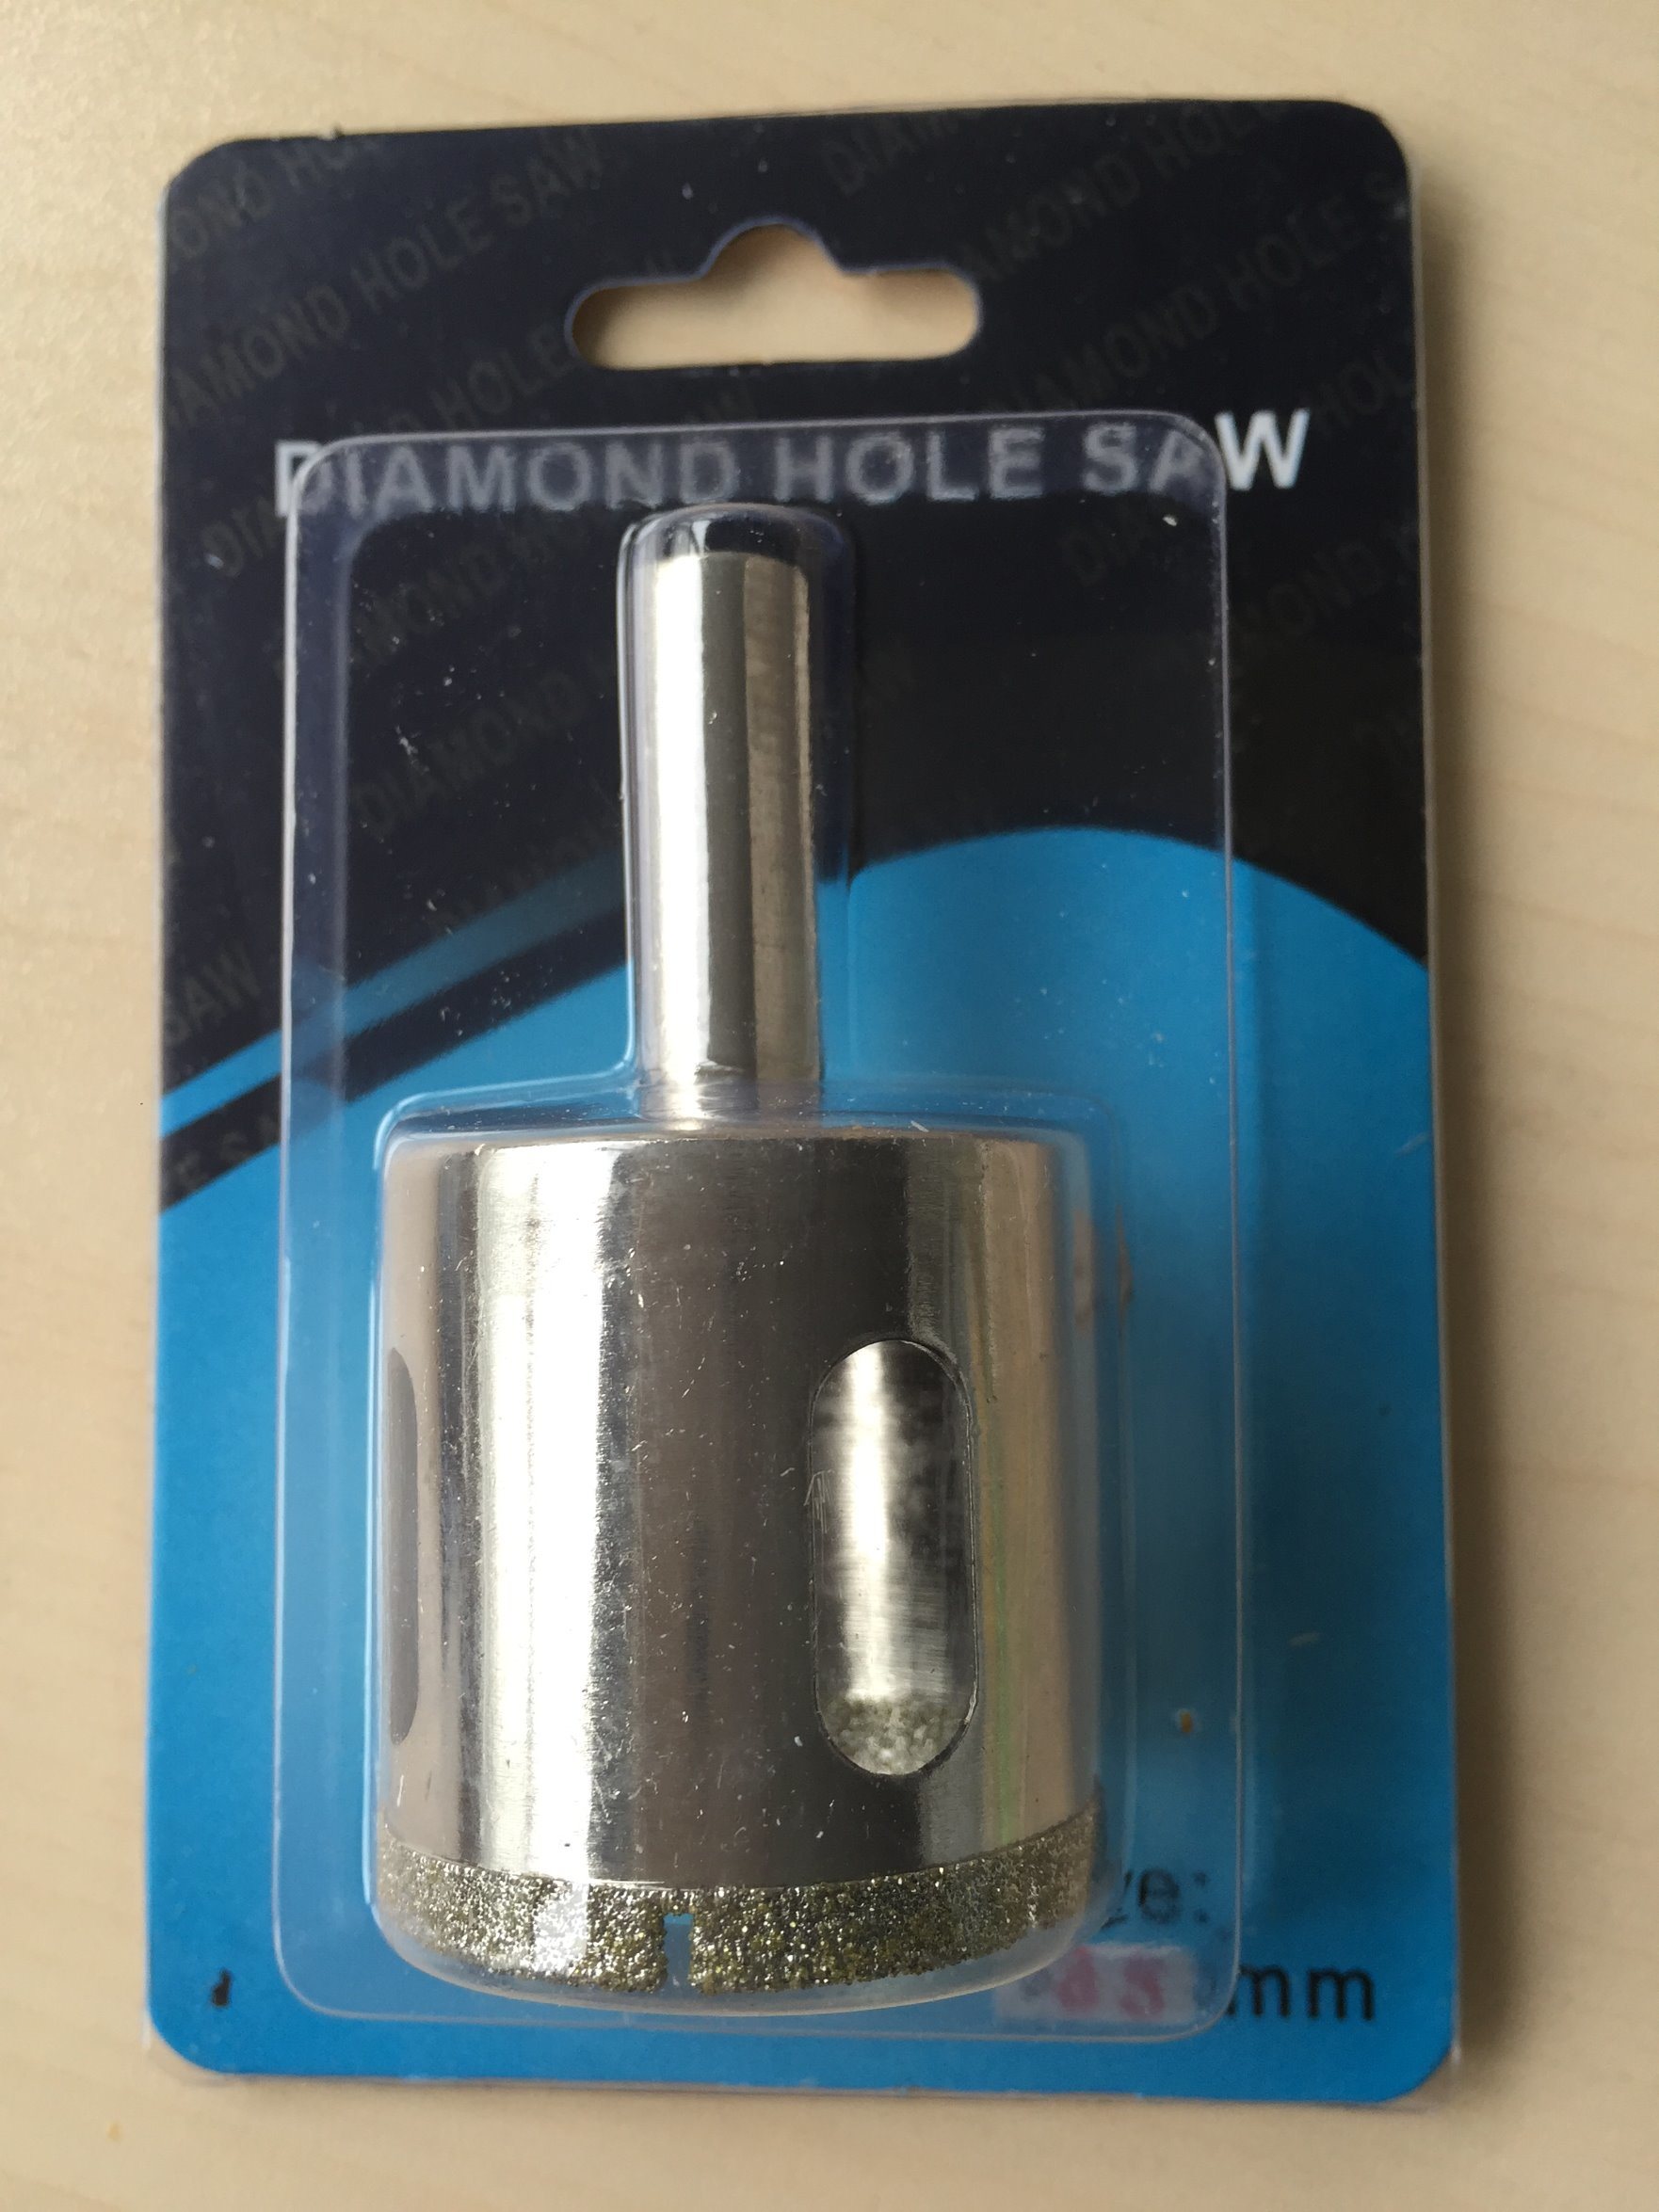 Electroplated Diamond Tools Diamond Hole Saw for Glass and Ceramic (SED-DHSG)